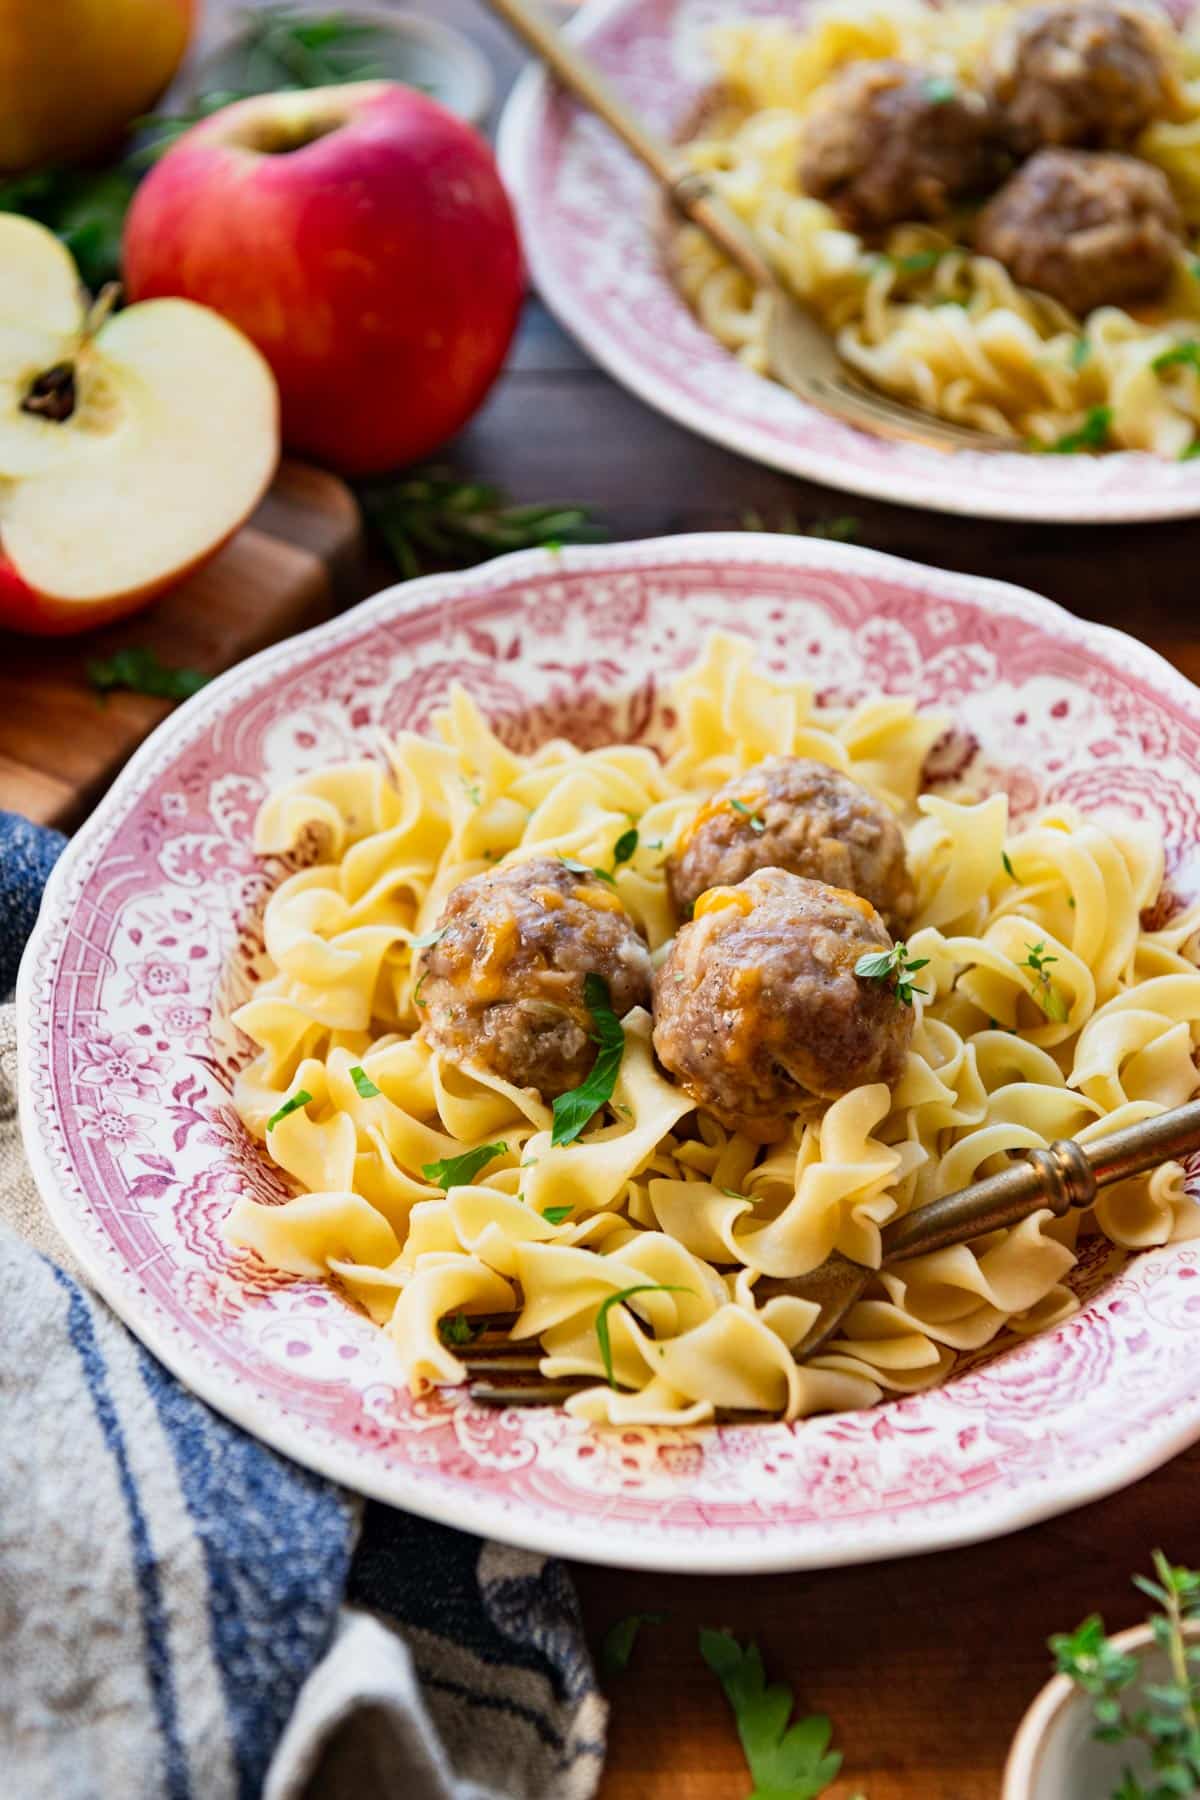 Fork in a bowl of buttered egg noodles with pork sausage meatballs on top.